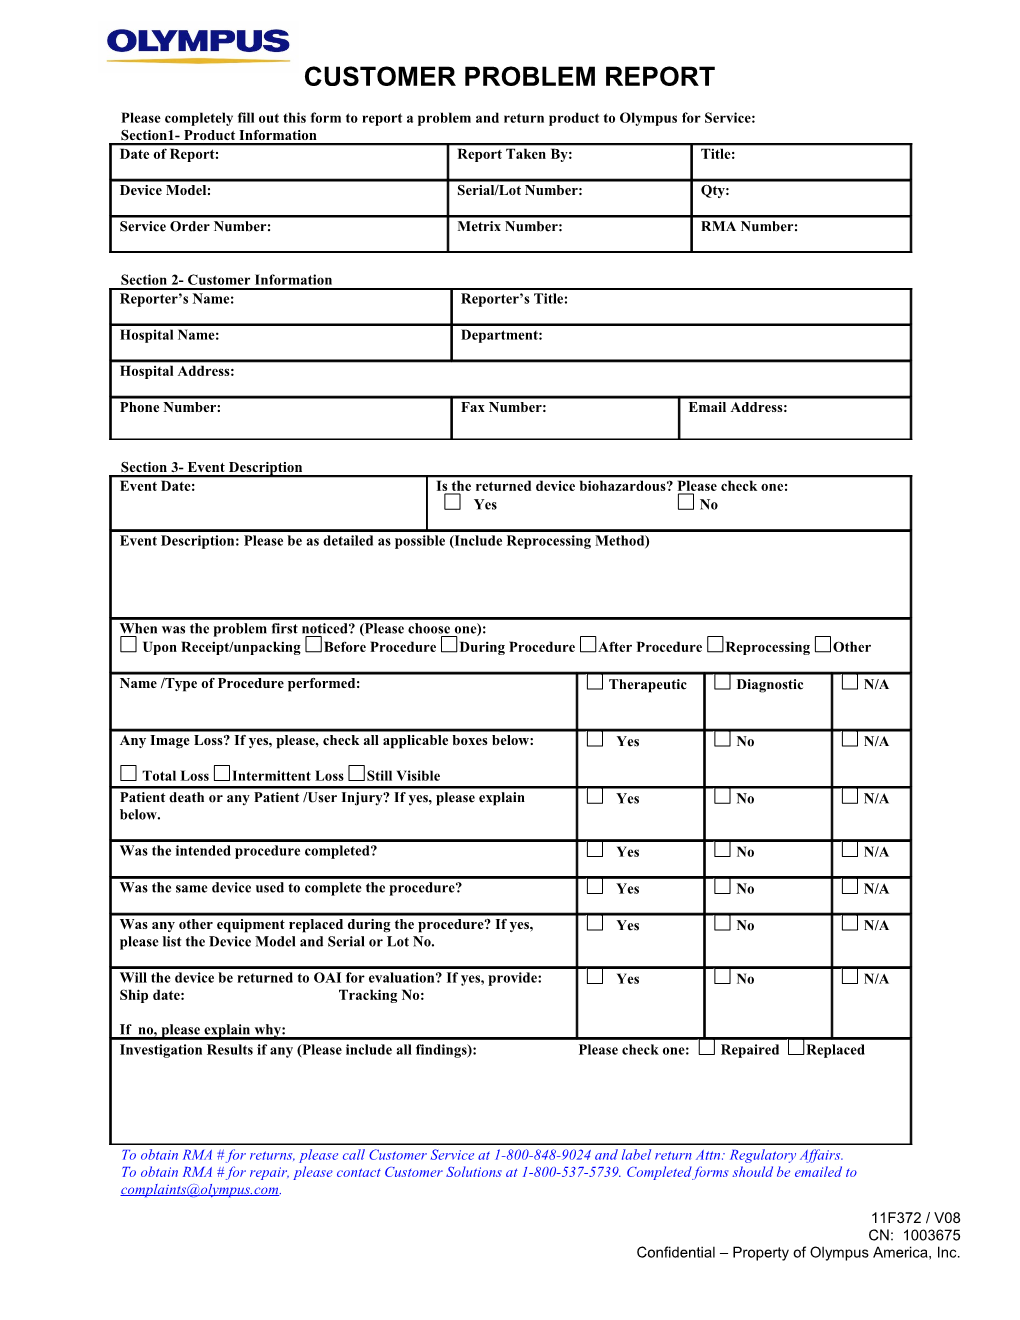 Please Completely Fill out This Form to Report a Problem and Return Product to Olympus